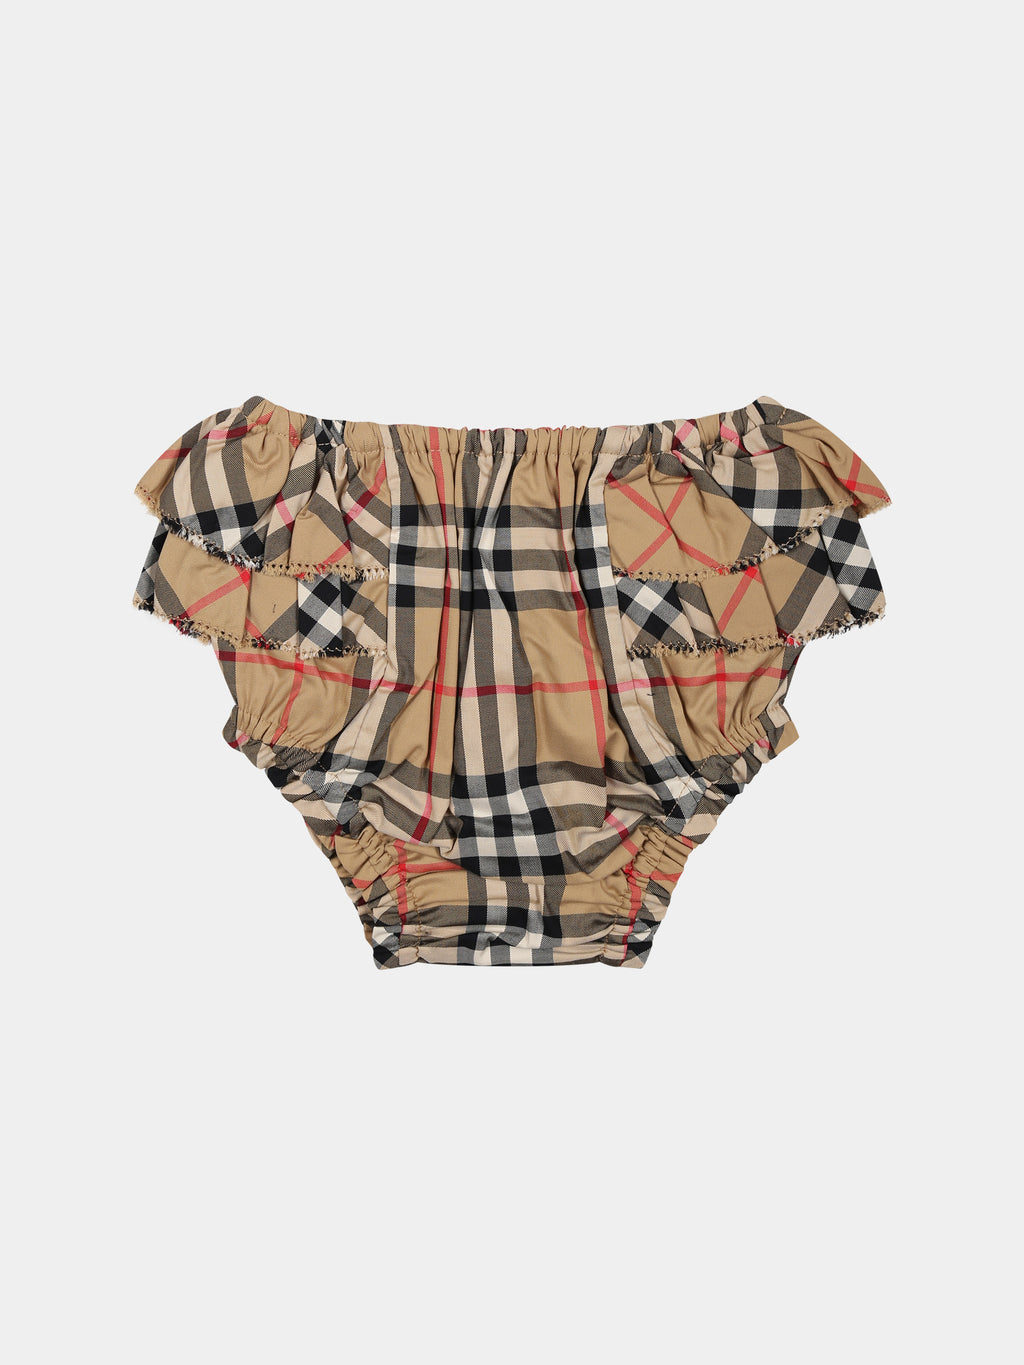 Beige shorts for baby girl with iconic all-over vintage check